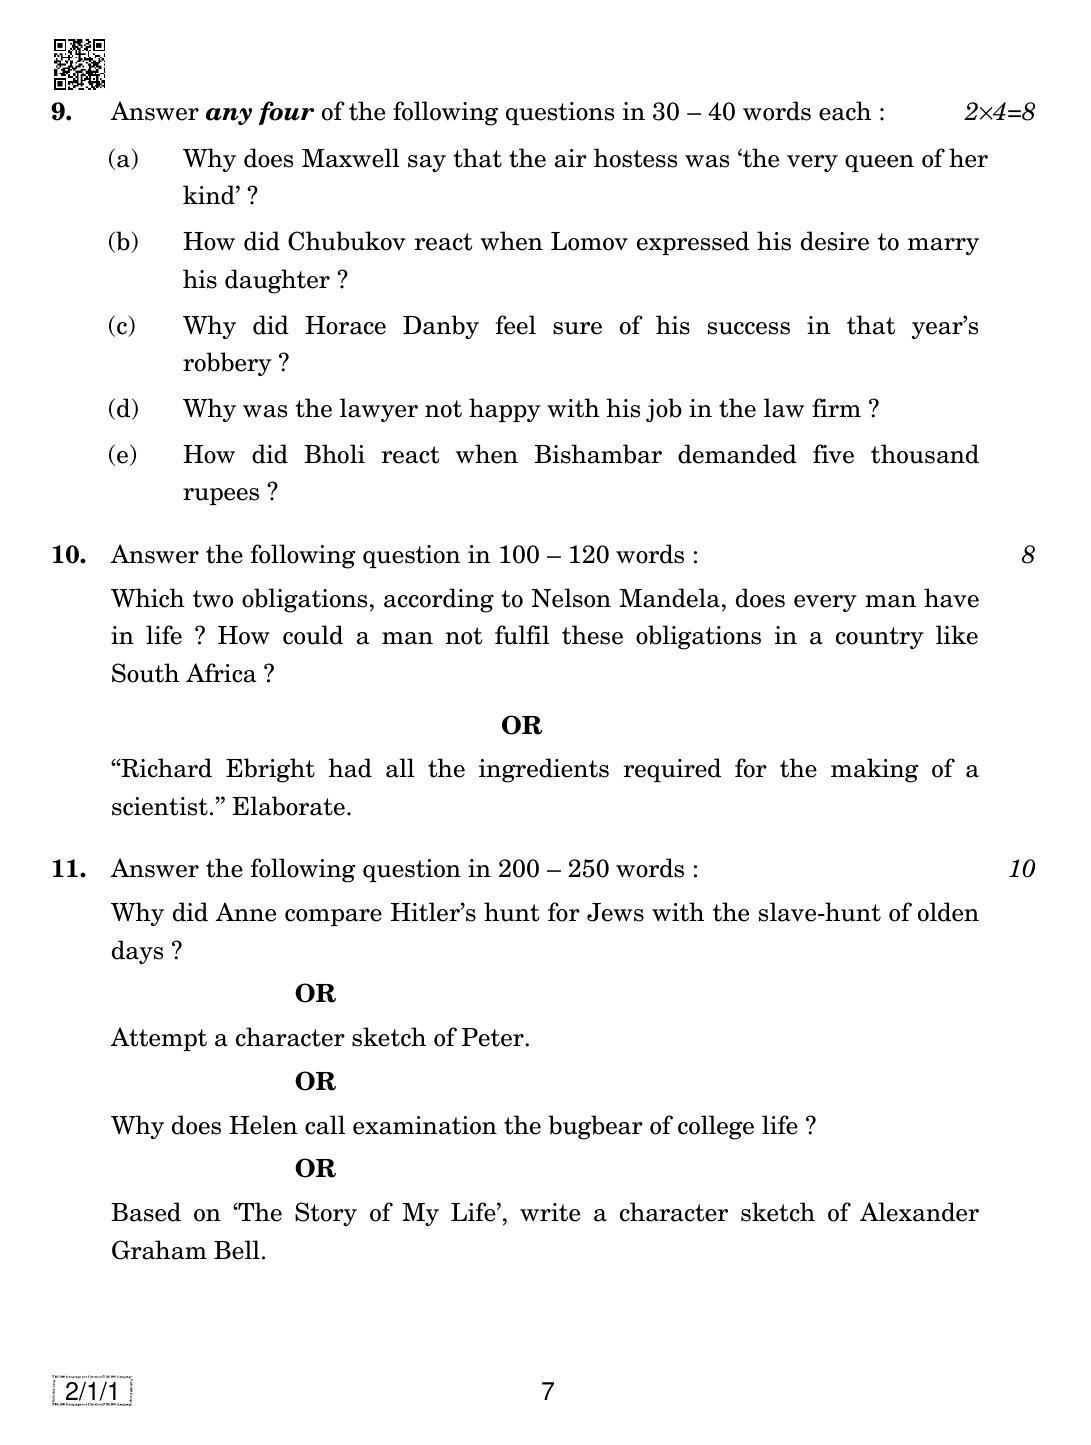 CBSE Class 10 2-1-1 ENGLISH LANG. & LIT. 2019 Compartment Question Paper - Page 7